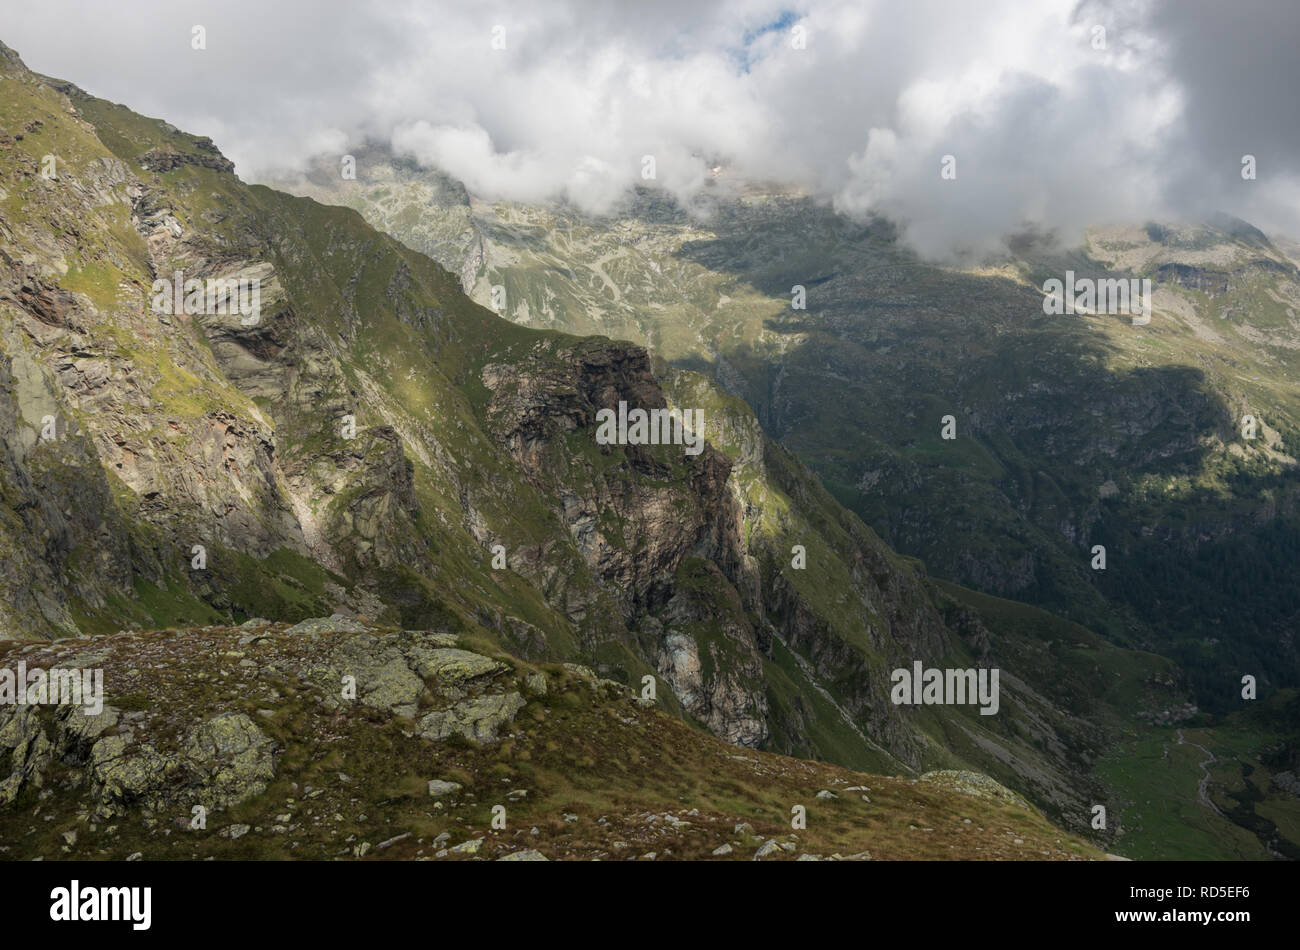 View to valley Bors from top of Cascata delle Pisse waterfall, Alagna Valsesia area, Italy Stock Photo